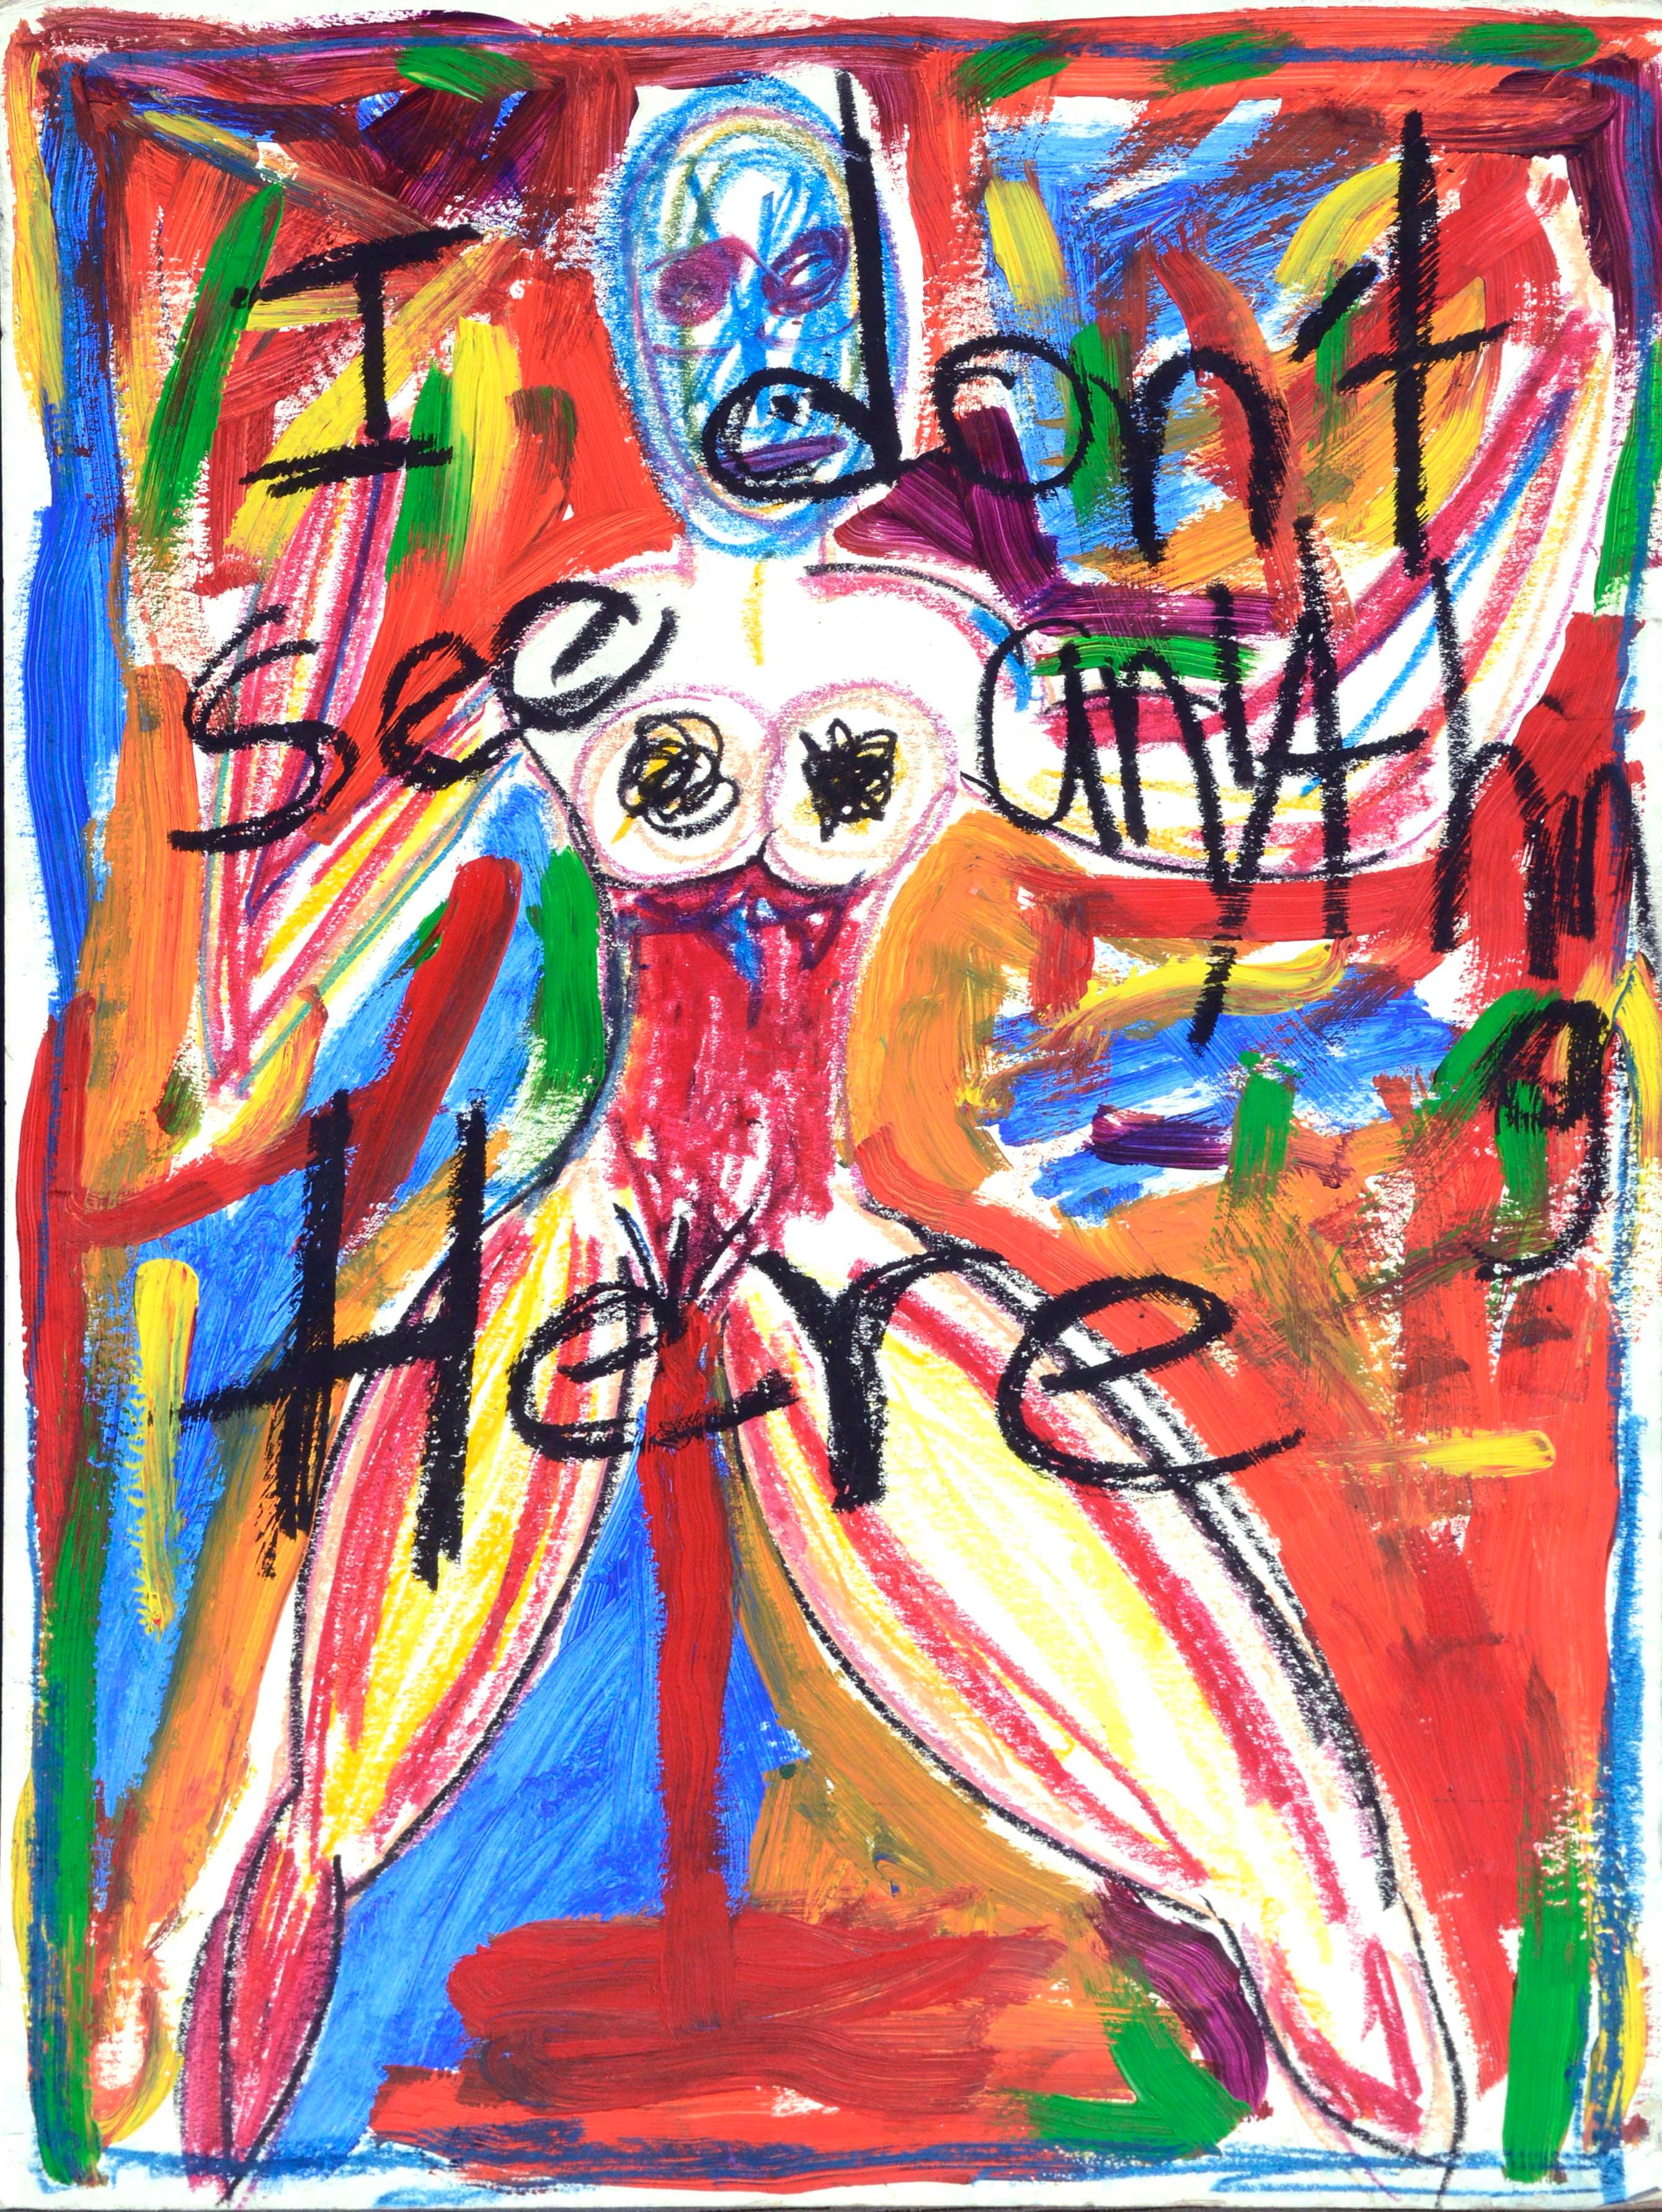 Abstract Expressionist Figure - "I Don't See Anything Here"